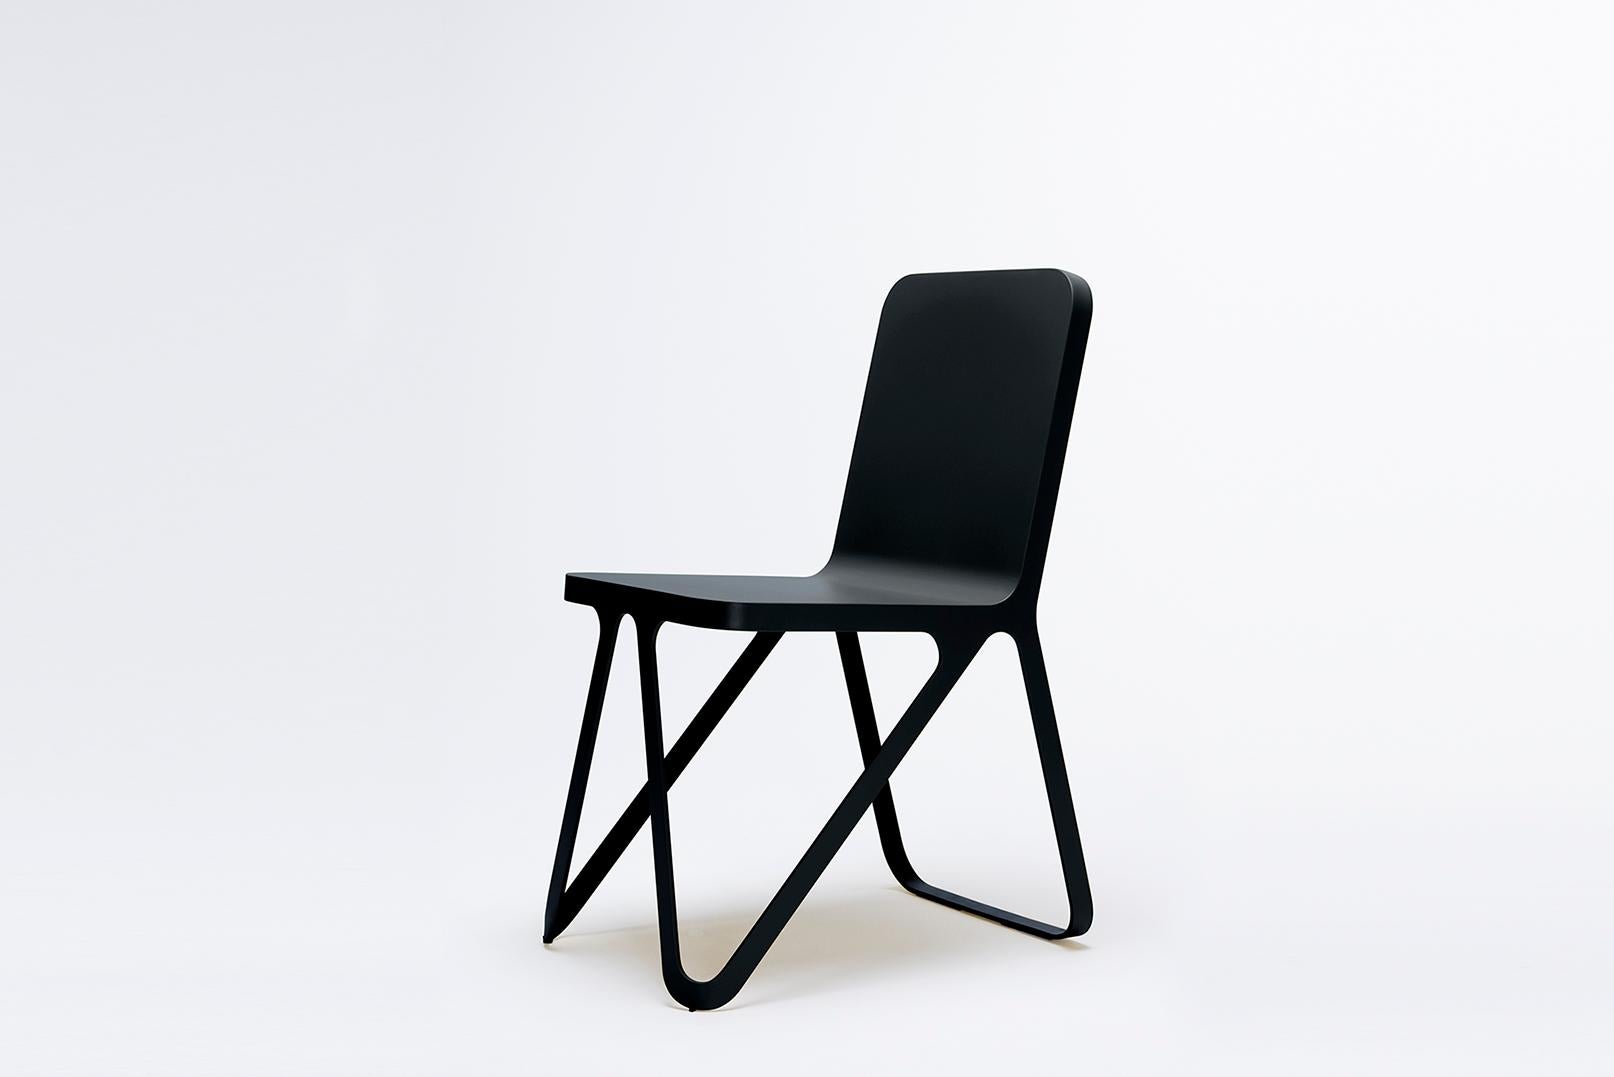 Night black loop chair by Sebastian Scherer
Dimensions: D 57x W 40 x H 80 cm.
Material: aluminium.
Weight: 5.1 kg.
Also available: colors: snow white / light sand / sun yellow / clay orange / rust red / space blue / graphite grey / dark bronze /